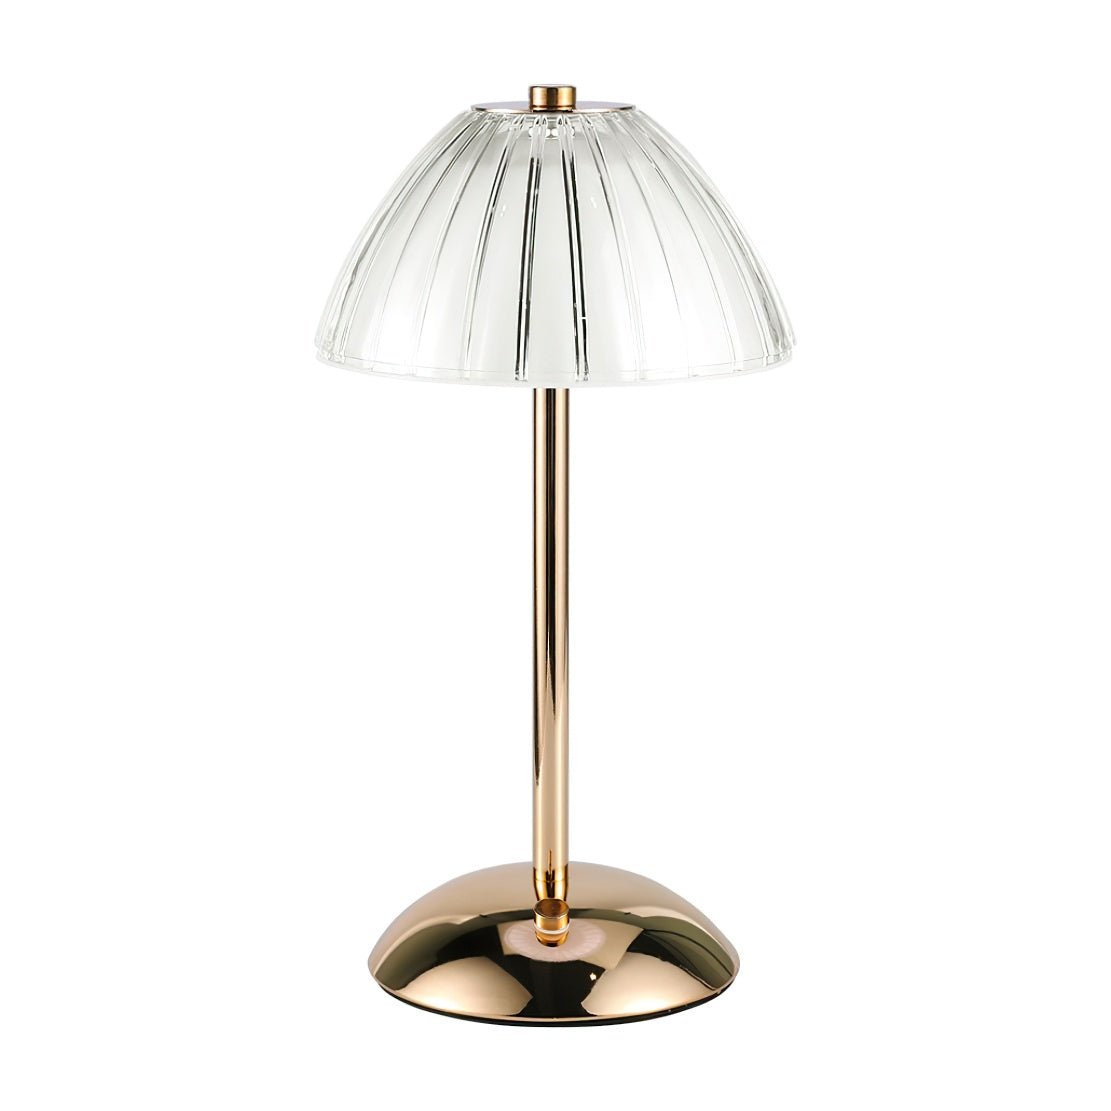 Gold glass decorative table lamp.